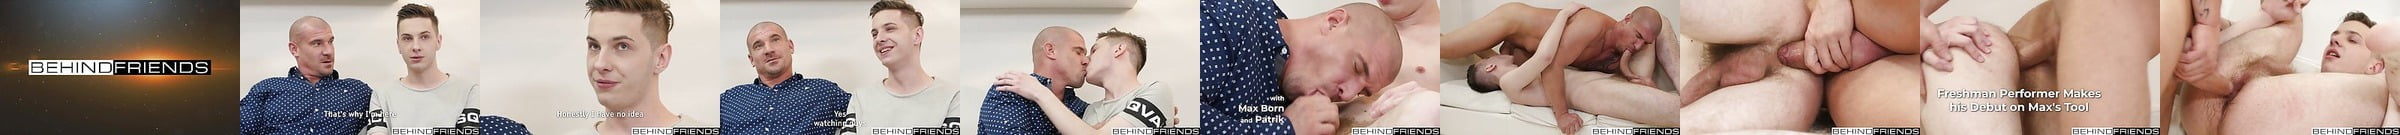 Hot Tub Max Sargent And Alex Tanner Gay Porn 04 Xhamster Xhamster